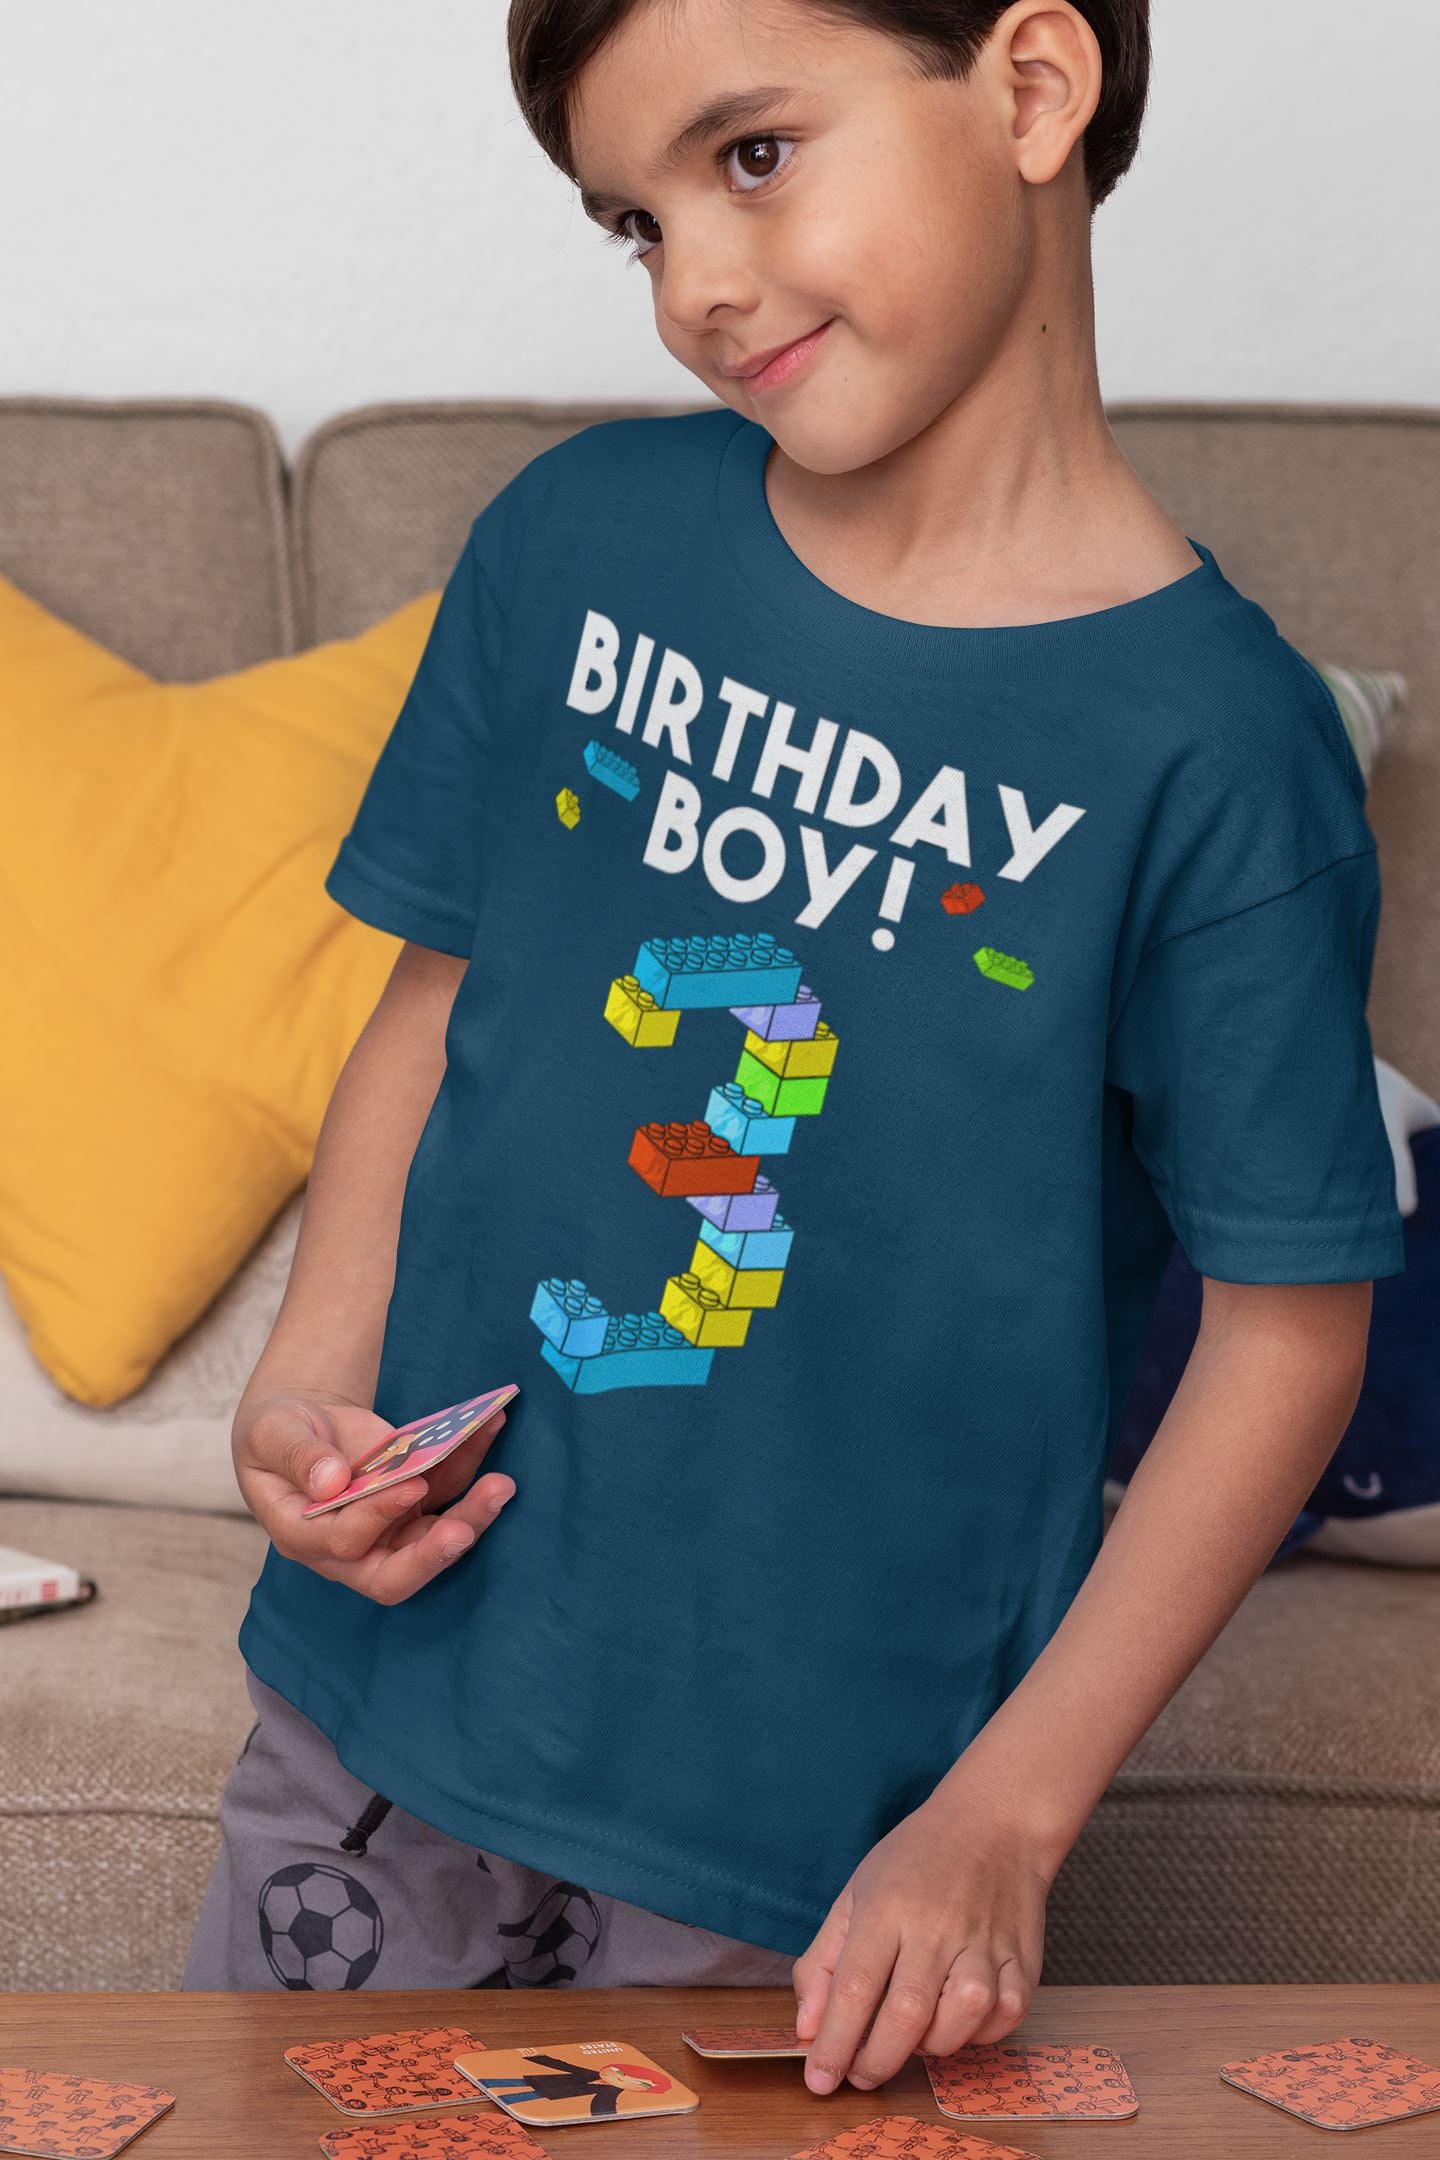 Birthday Boy 3 Exclusive Birthday T Shirt for 3 Year Old Baby Boy freeshipping - Catch My Drift India